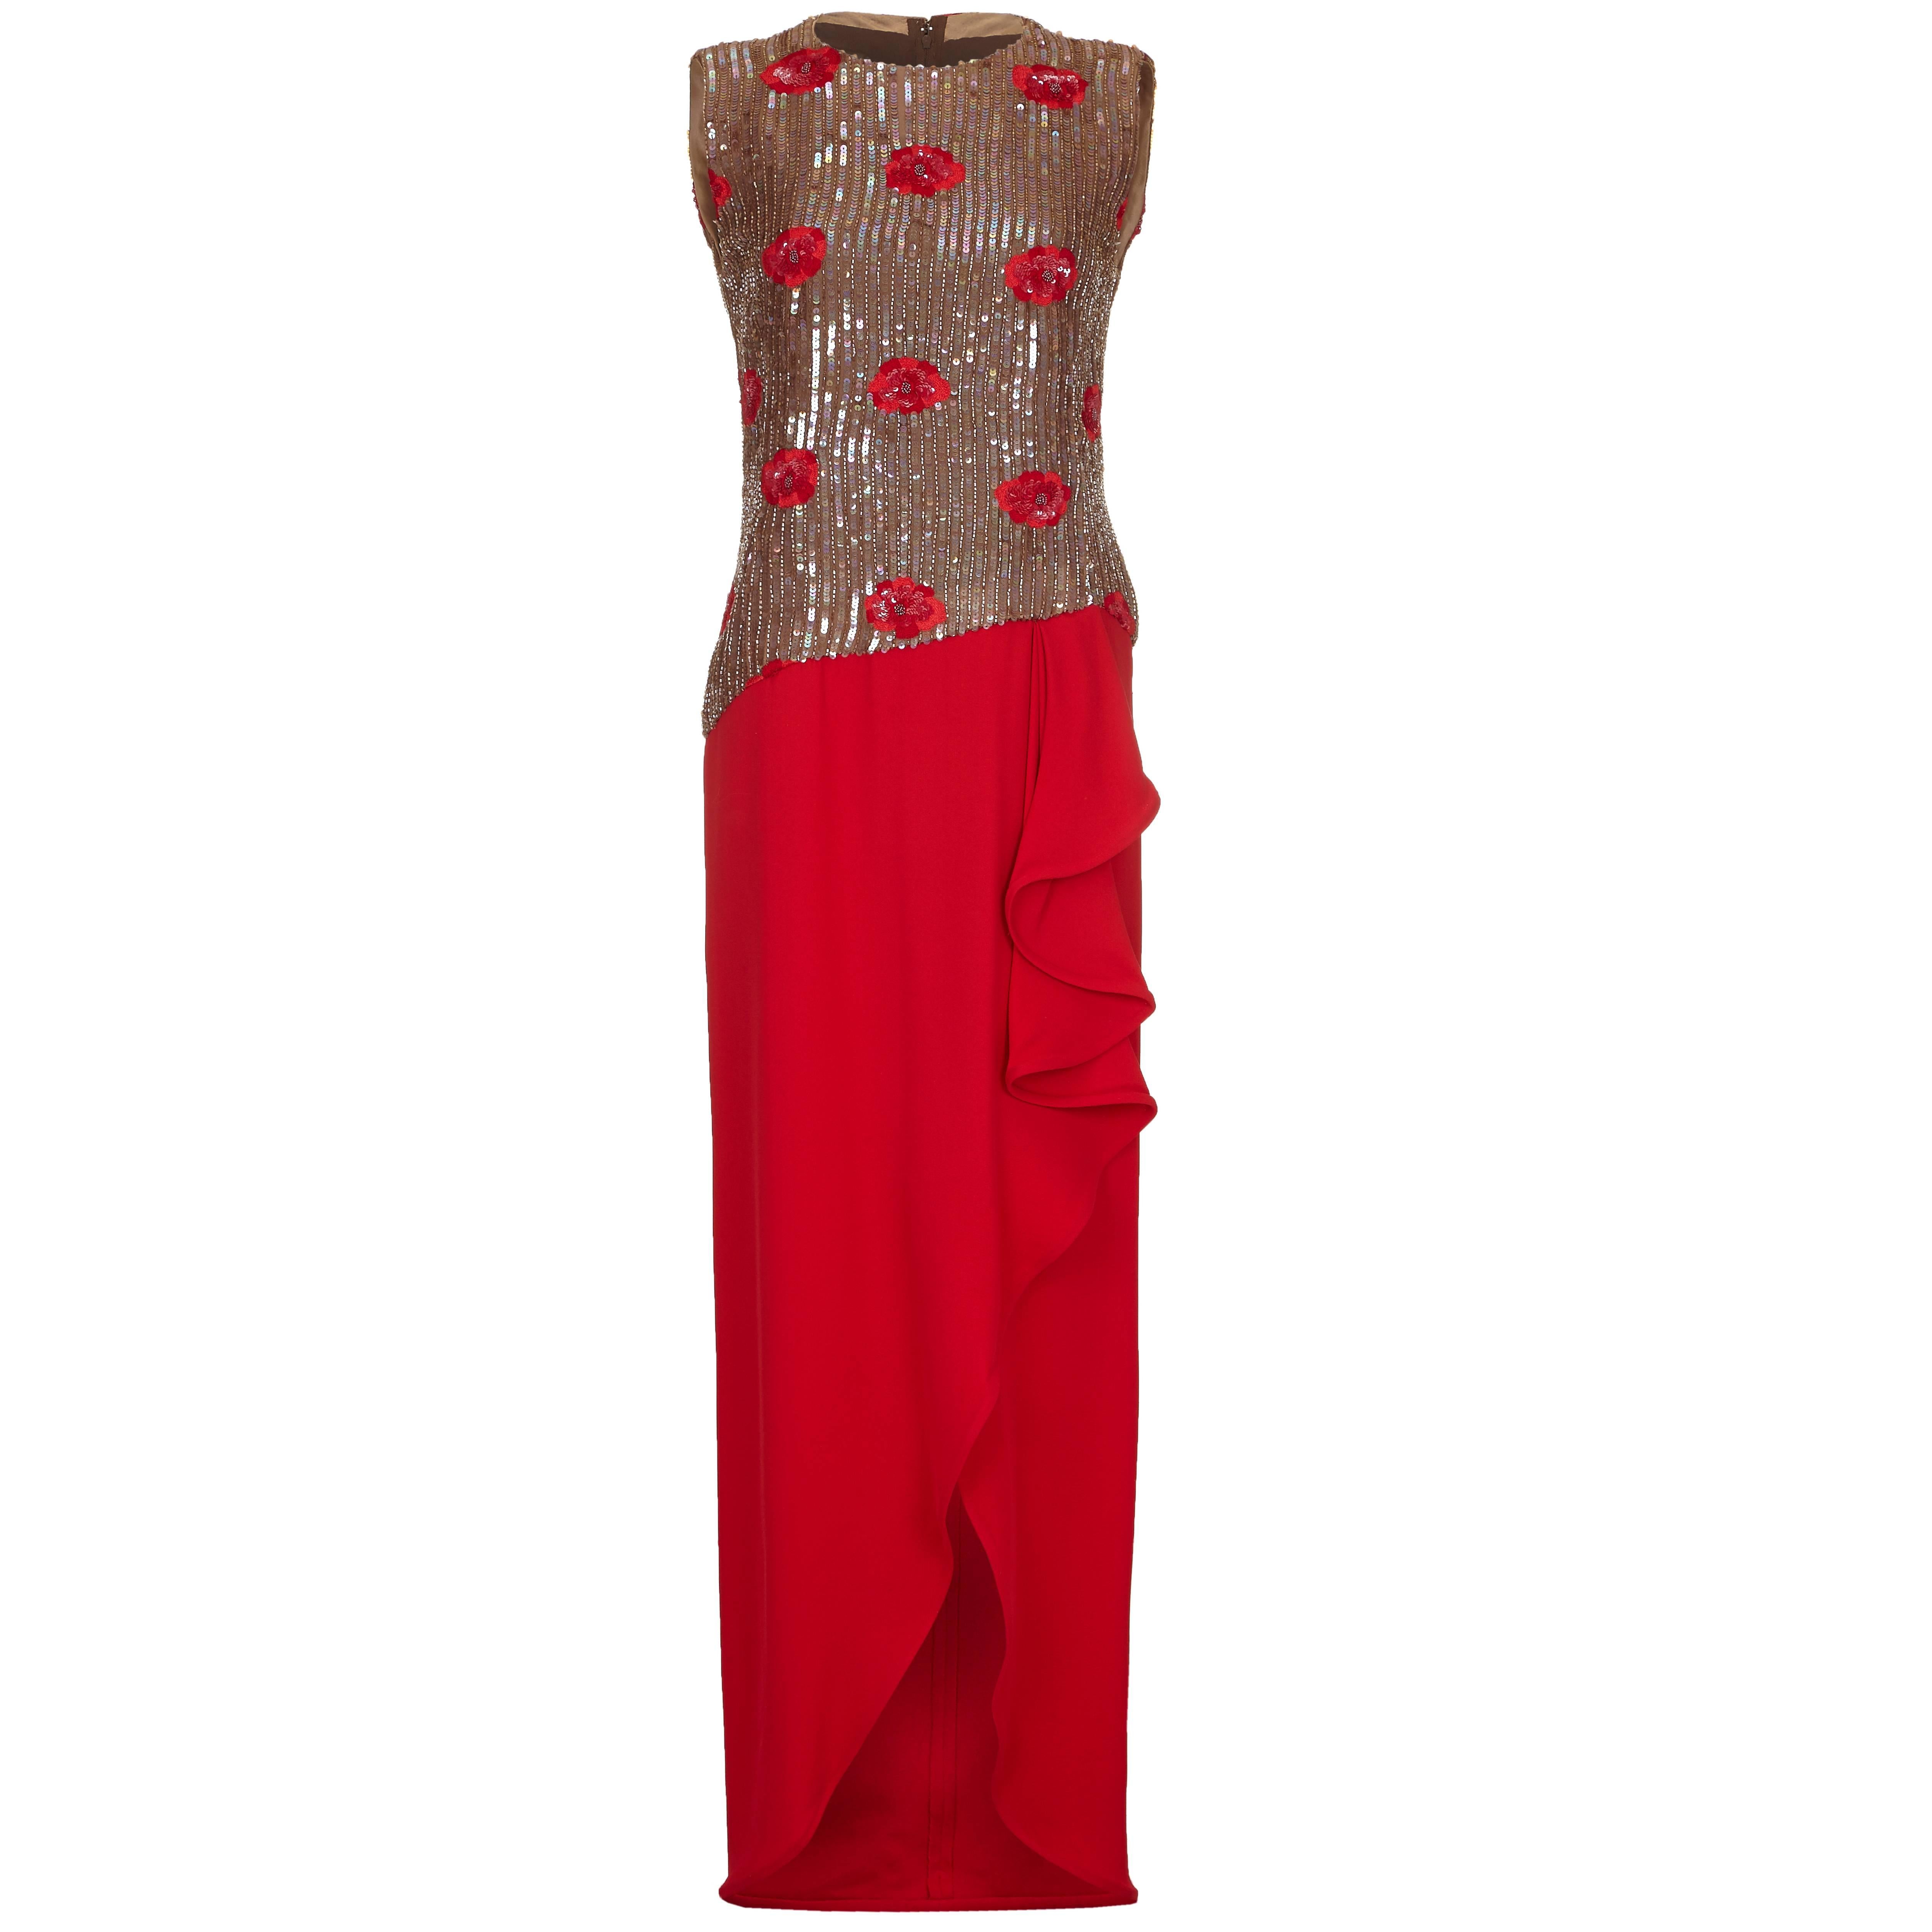 1970s Andre Laug Haute Couture Sequin Bodice and Red Crepe Dress